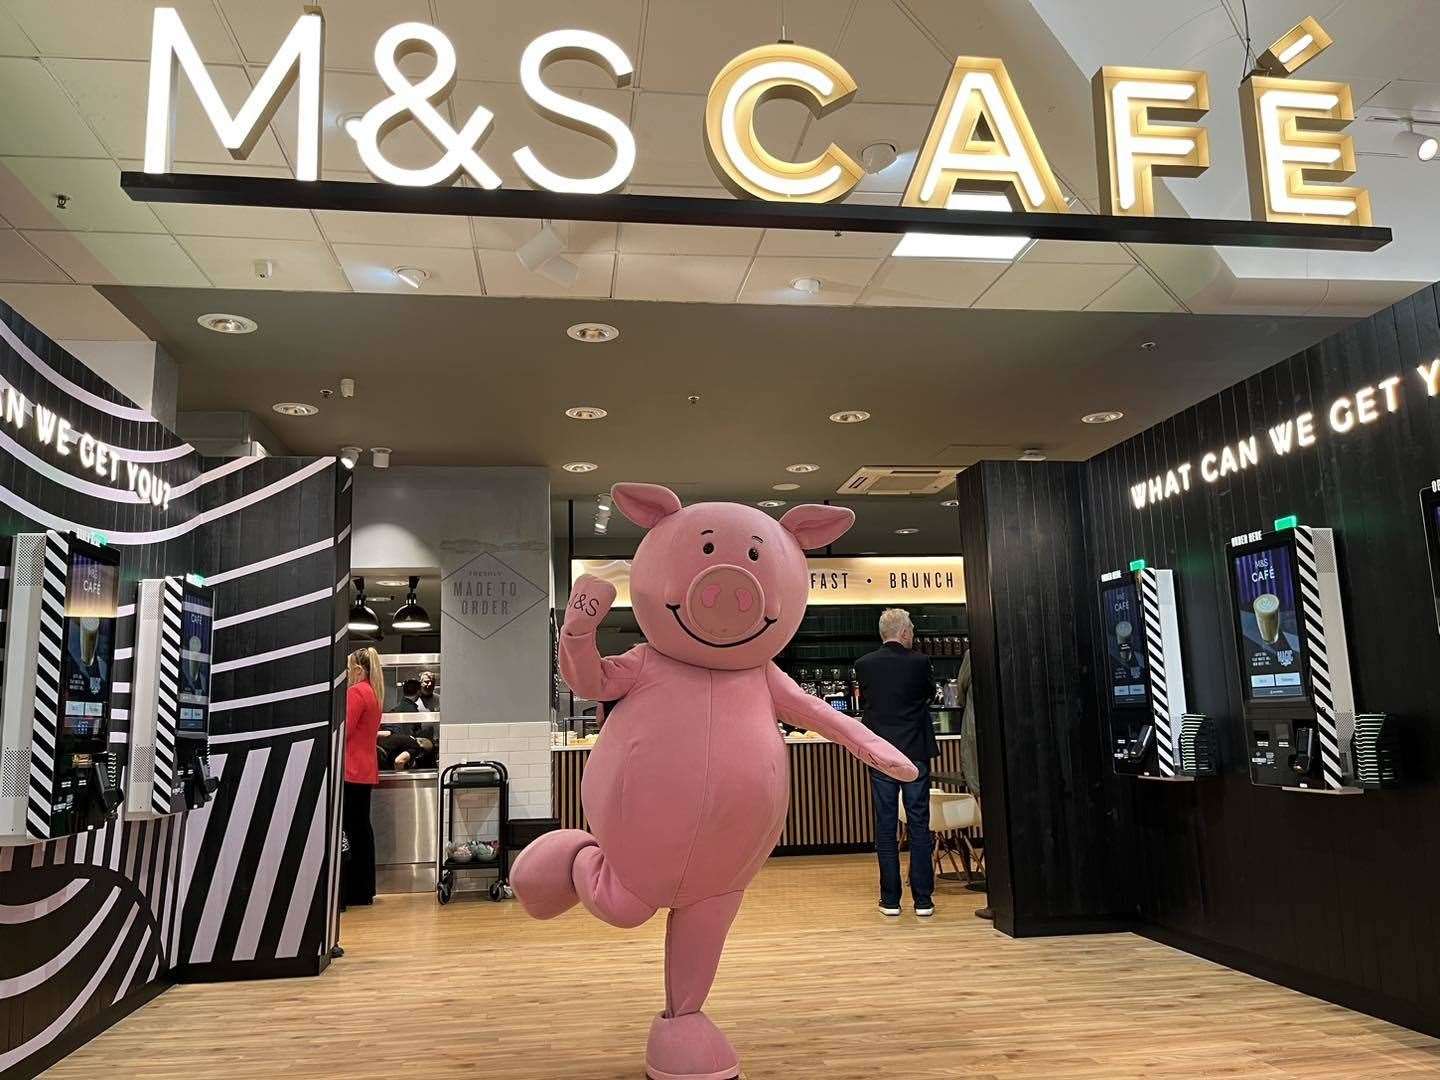 M&S café reopens at Hempstead Valley Shopping Centre in Gillingham after  overhaul